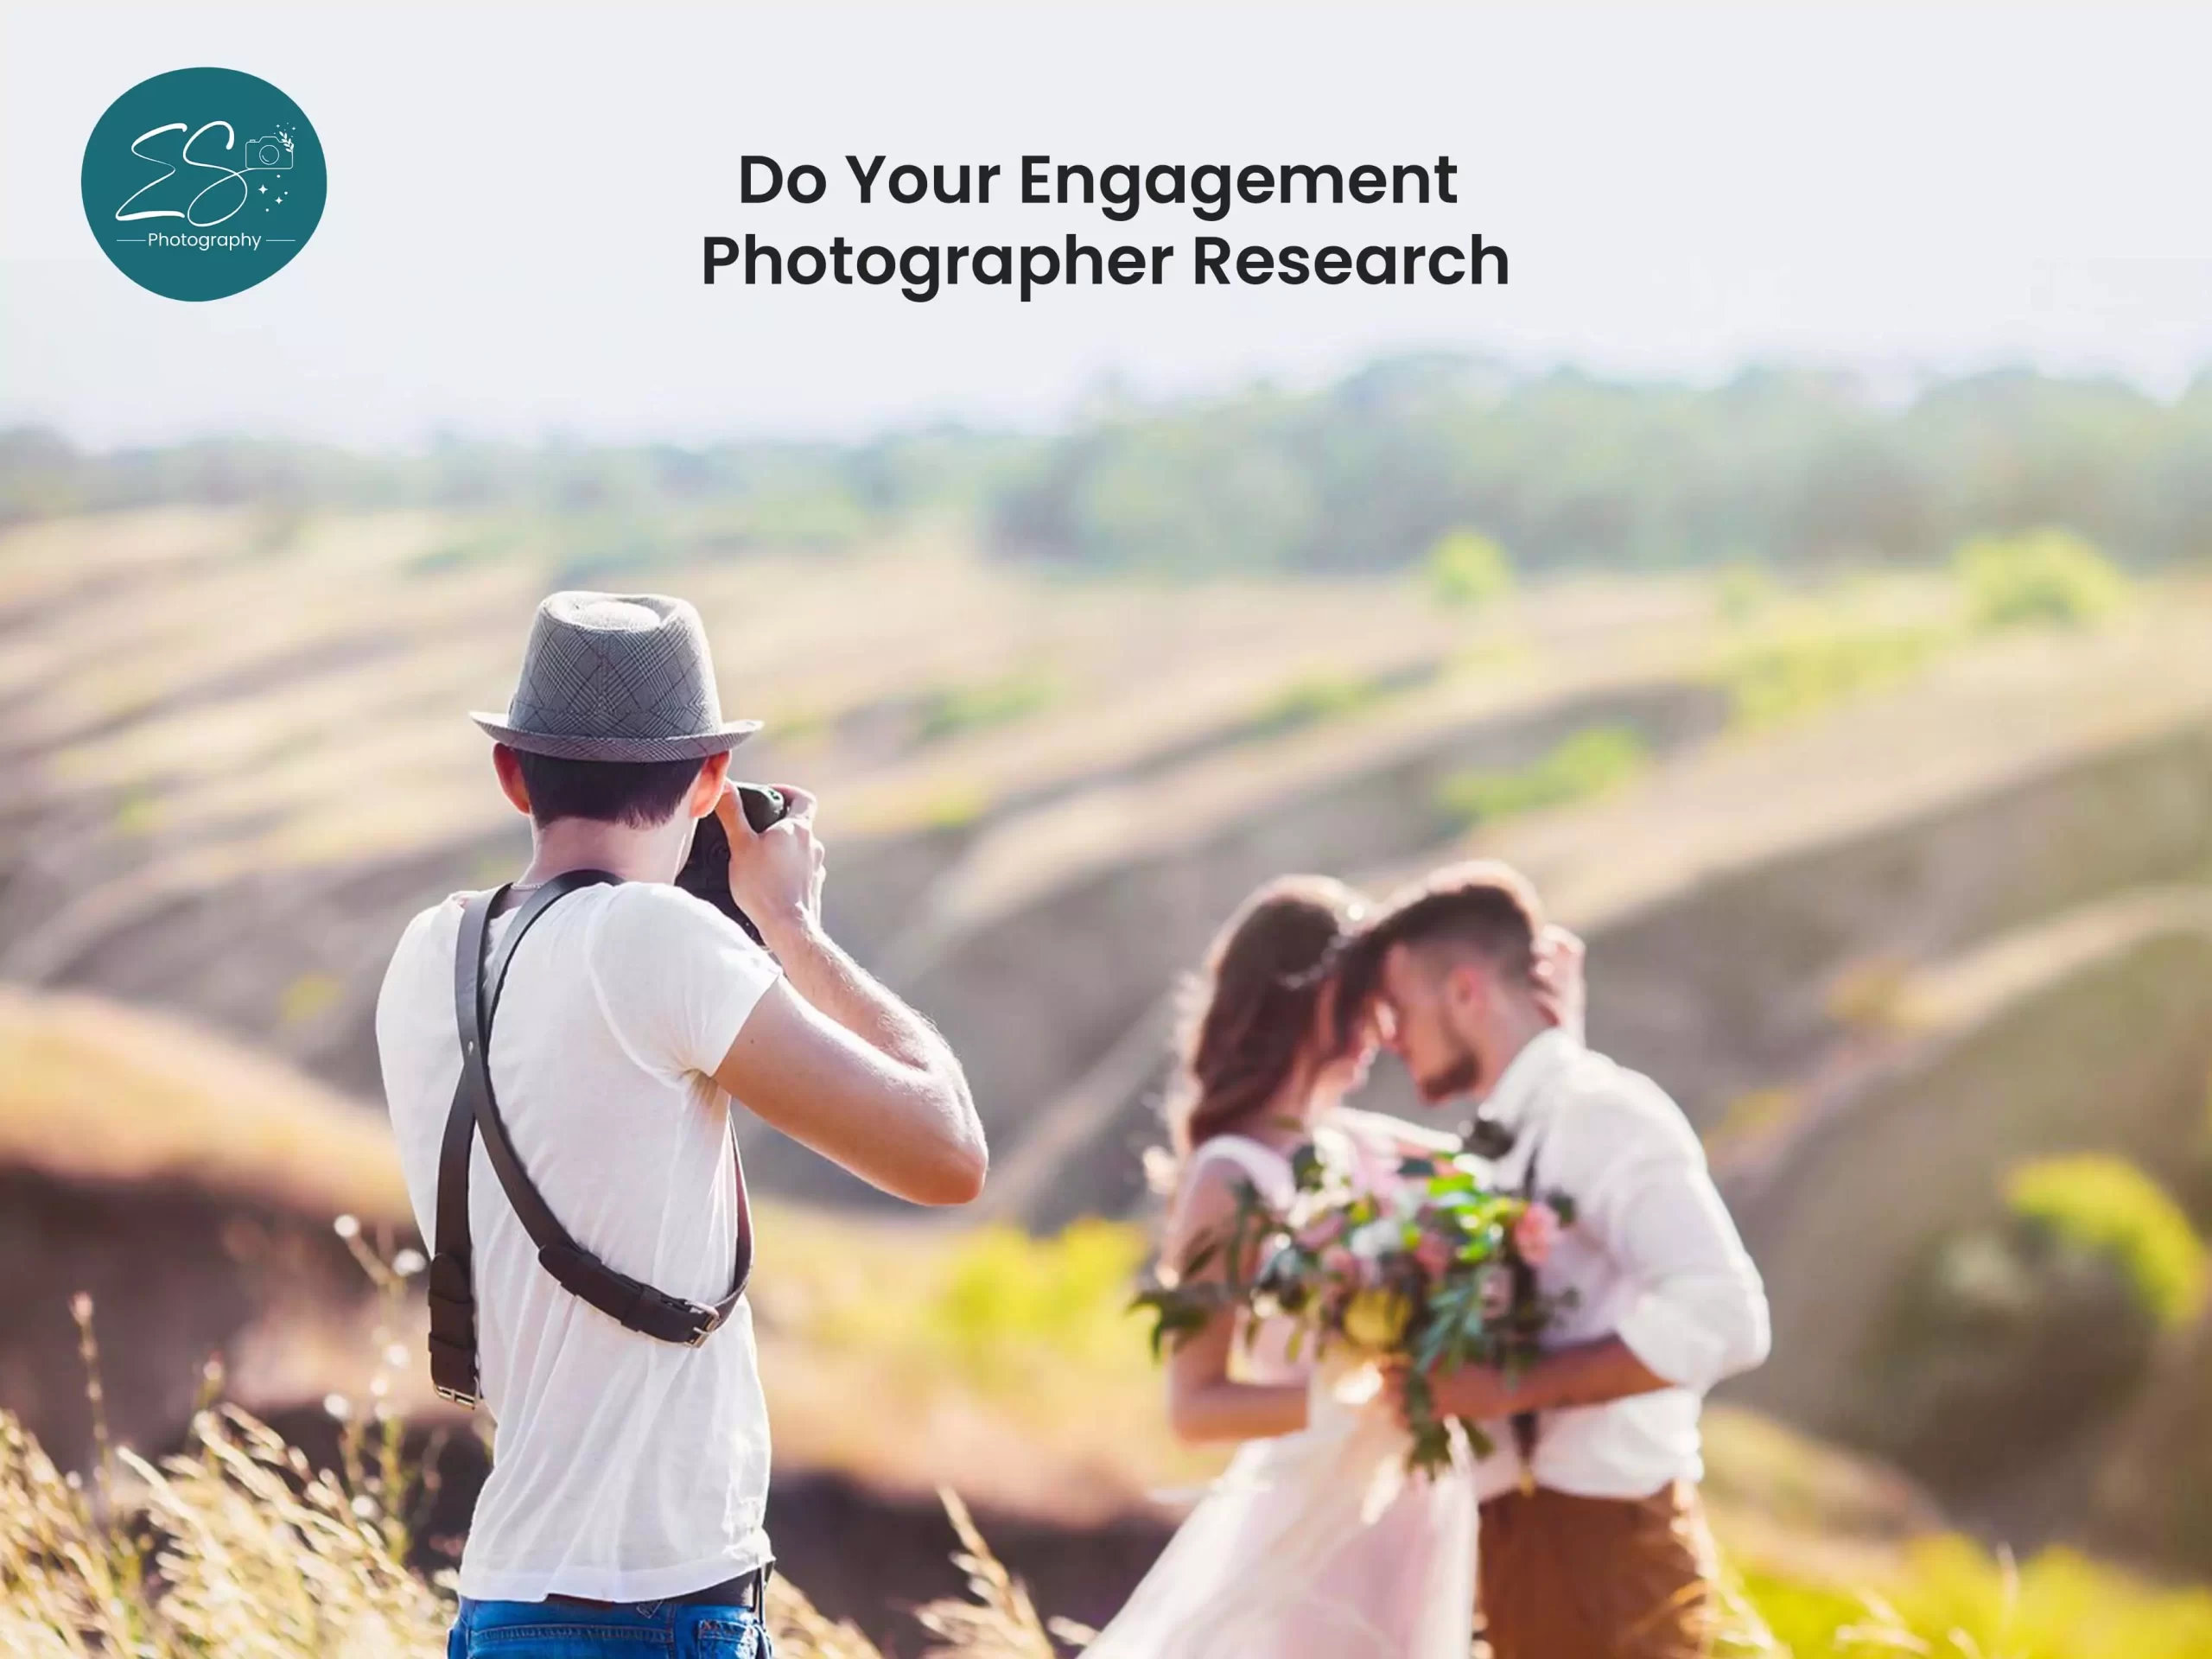 Do Your Engagement Photographer Research